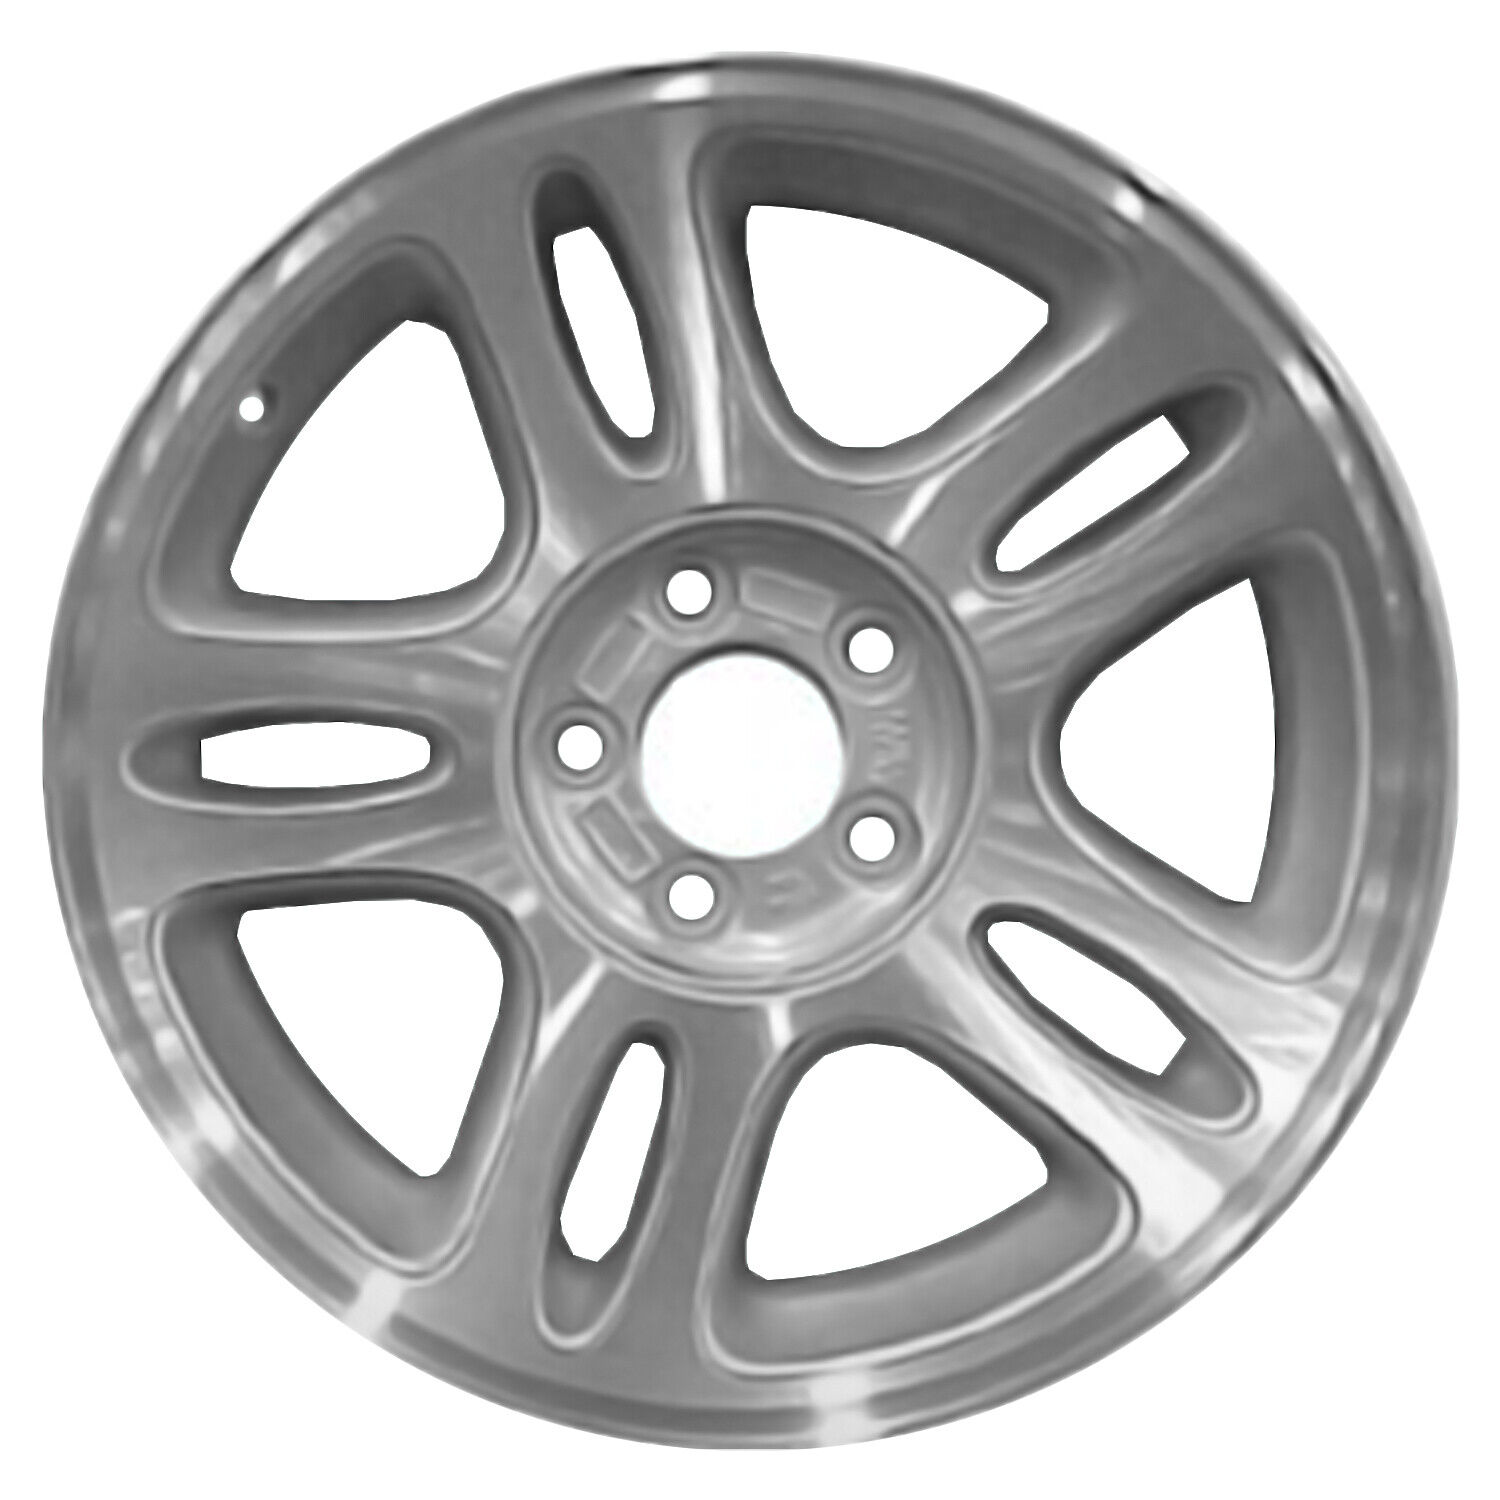 03174 Reconditioned OEM Aluminum Wheel 17x8 fits 1996-1998 Ford Mustang GT